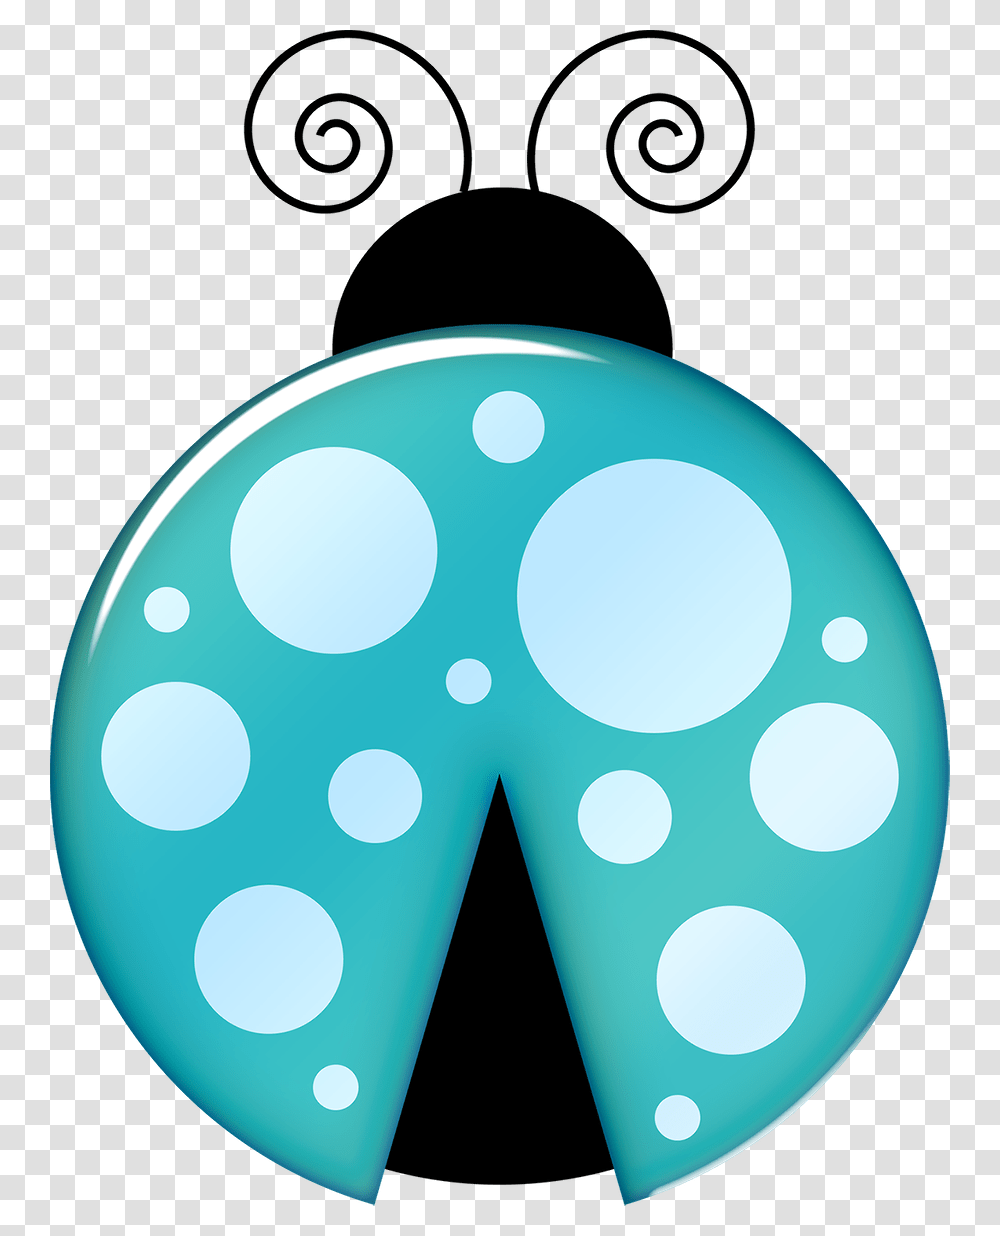 Ladybug Clip Art And Lady Bugs, Egg, Food, Sphere, Texture Transparent Png